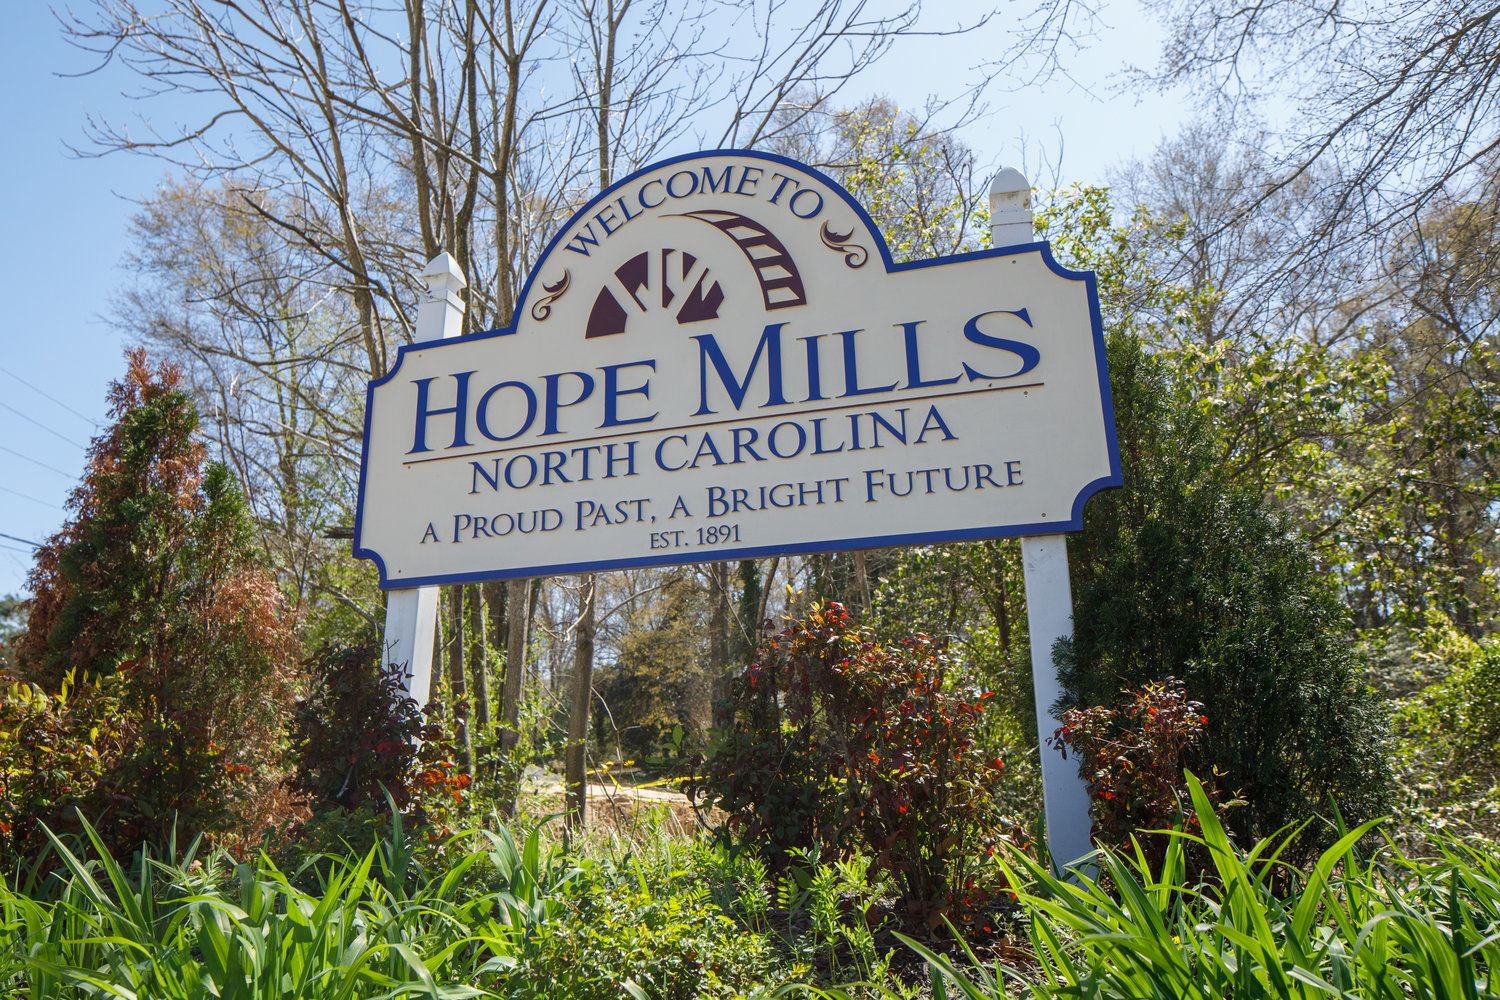 Poor conditions on Applegate Road were the focus of public comment at the Hope Mills Board of Commissioners meeting on Monday night.